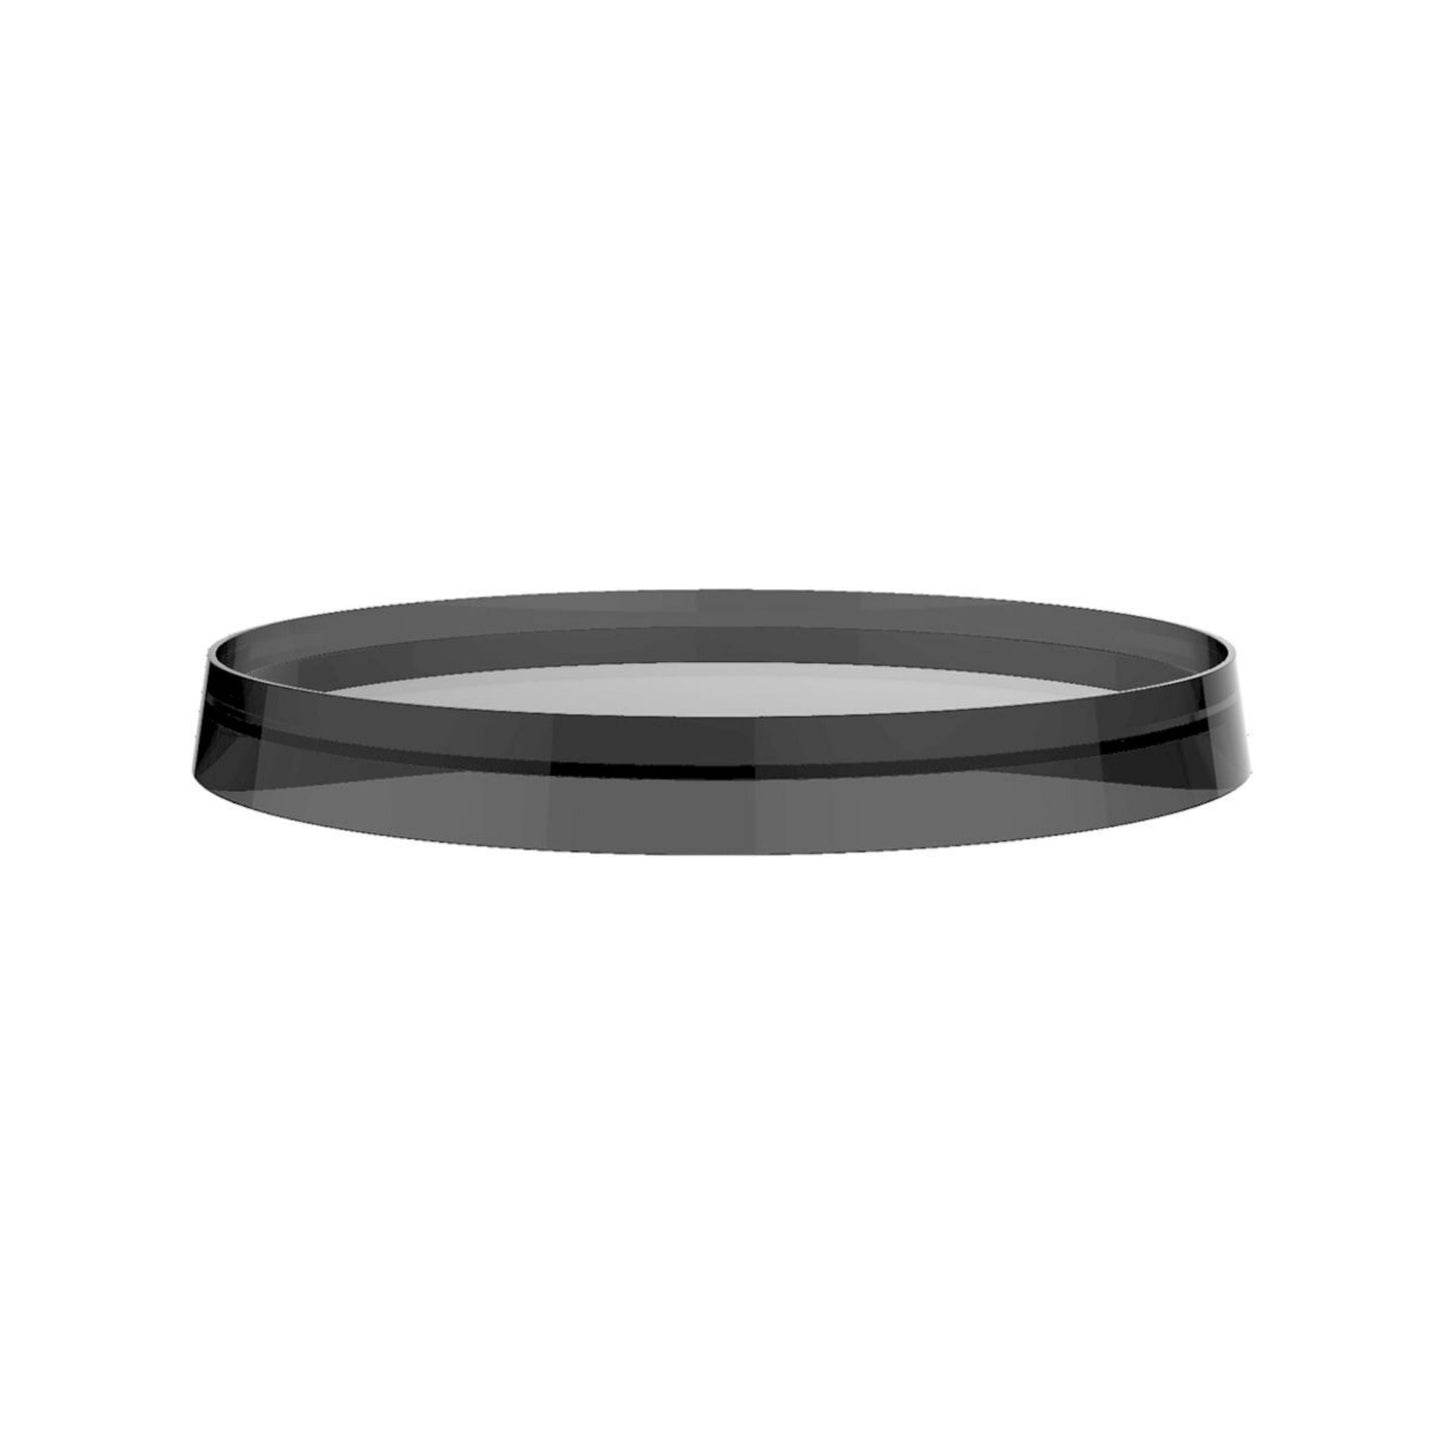 Laufen Kartell 7" Smoky Gray Disc Tray for Toilet Paper Holders, Faucets, and Wall-Mounted Trays